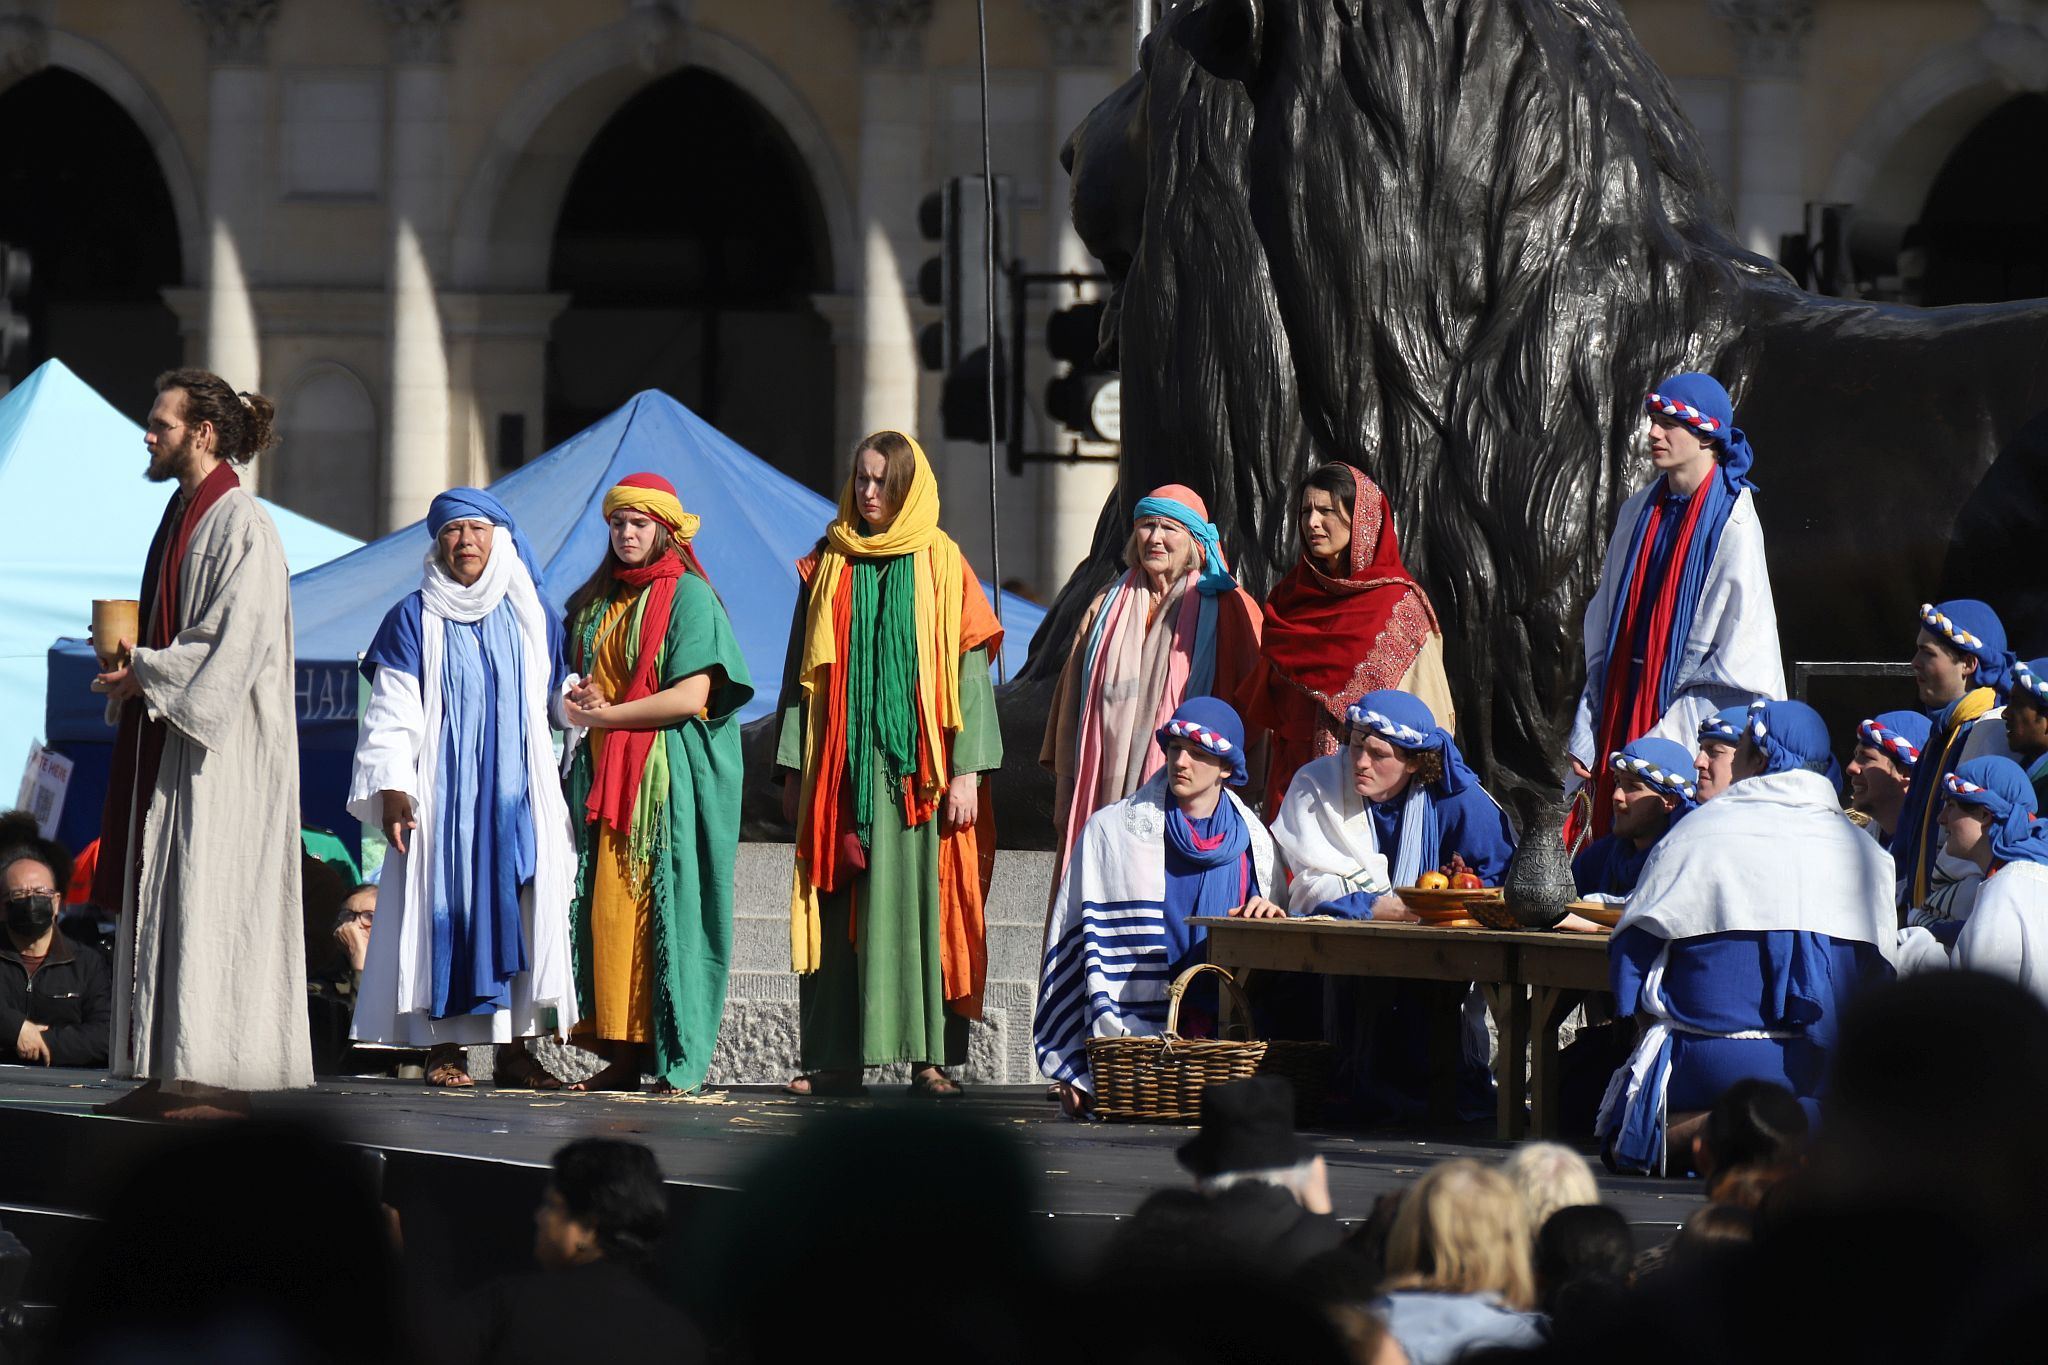 The Good Friday Wintershall Easter Passion Play "The Passion of Jesus" presented at Trafalgar Square in London. 7th April 2023. The Last Supper.